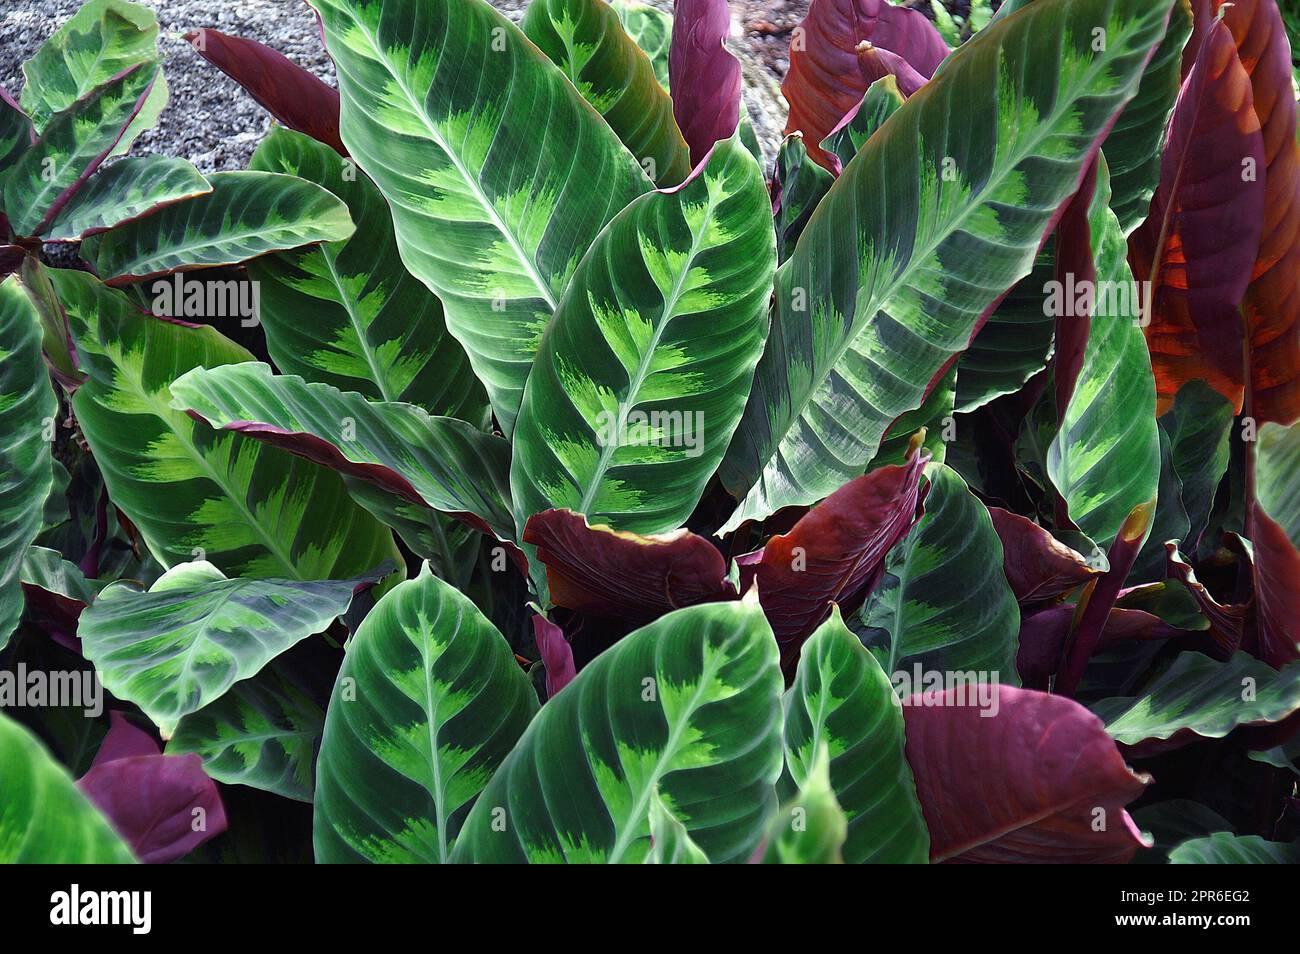 Close-up image of Peacock plant Stock Photo